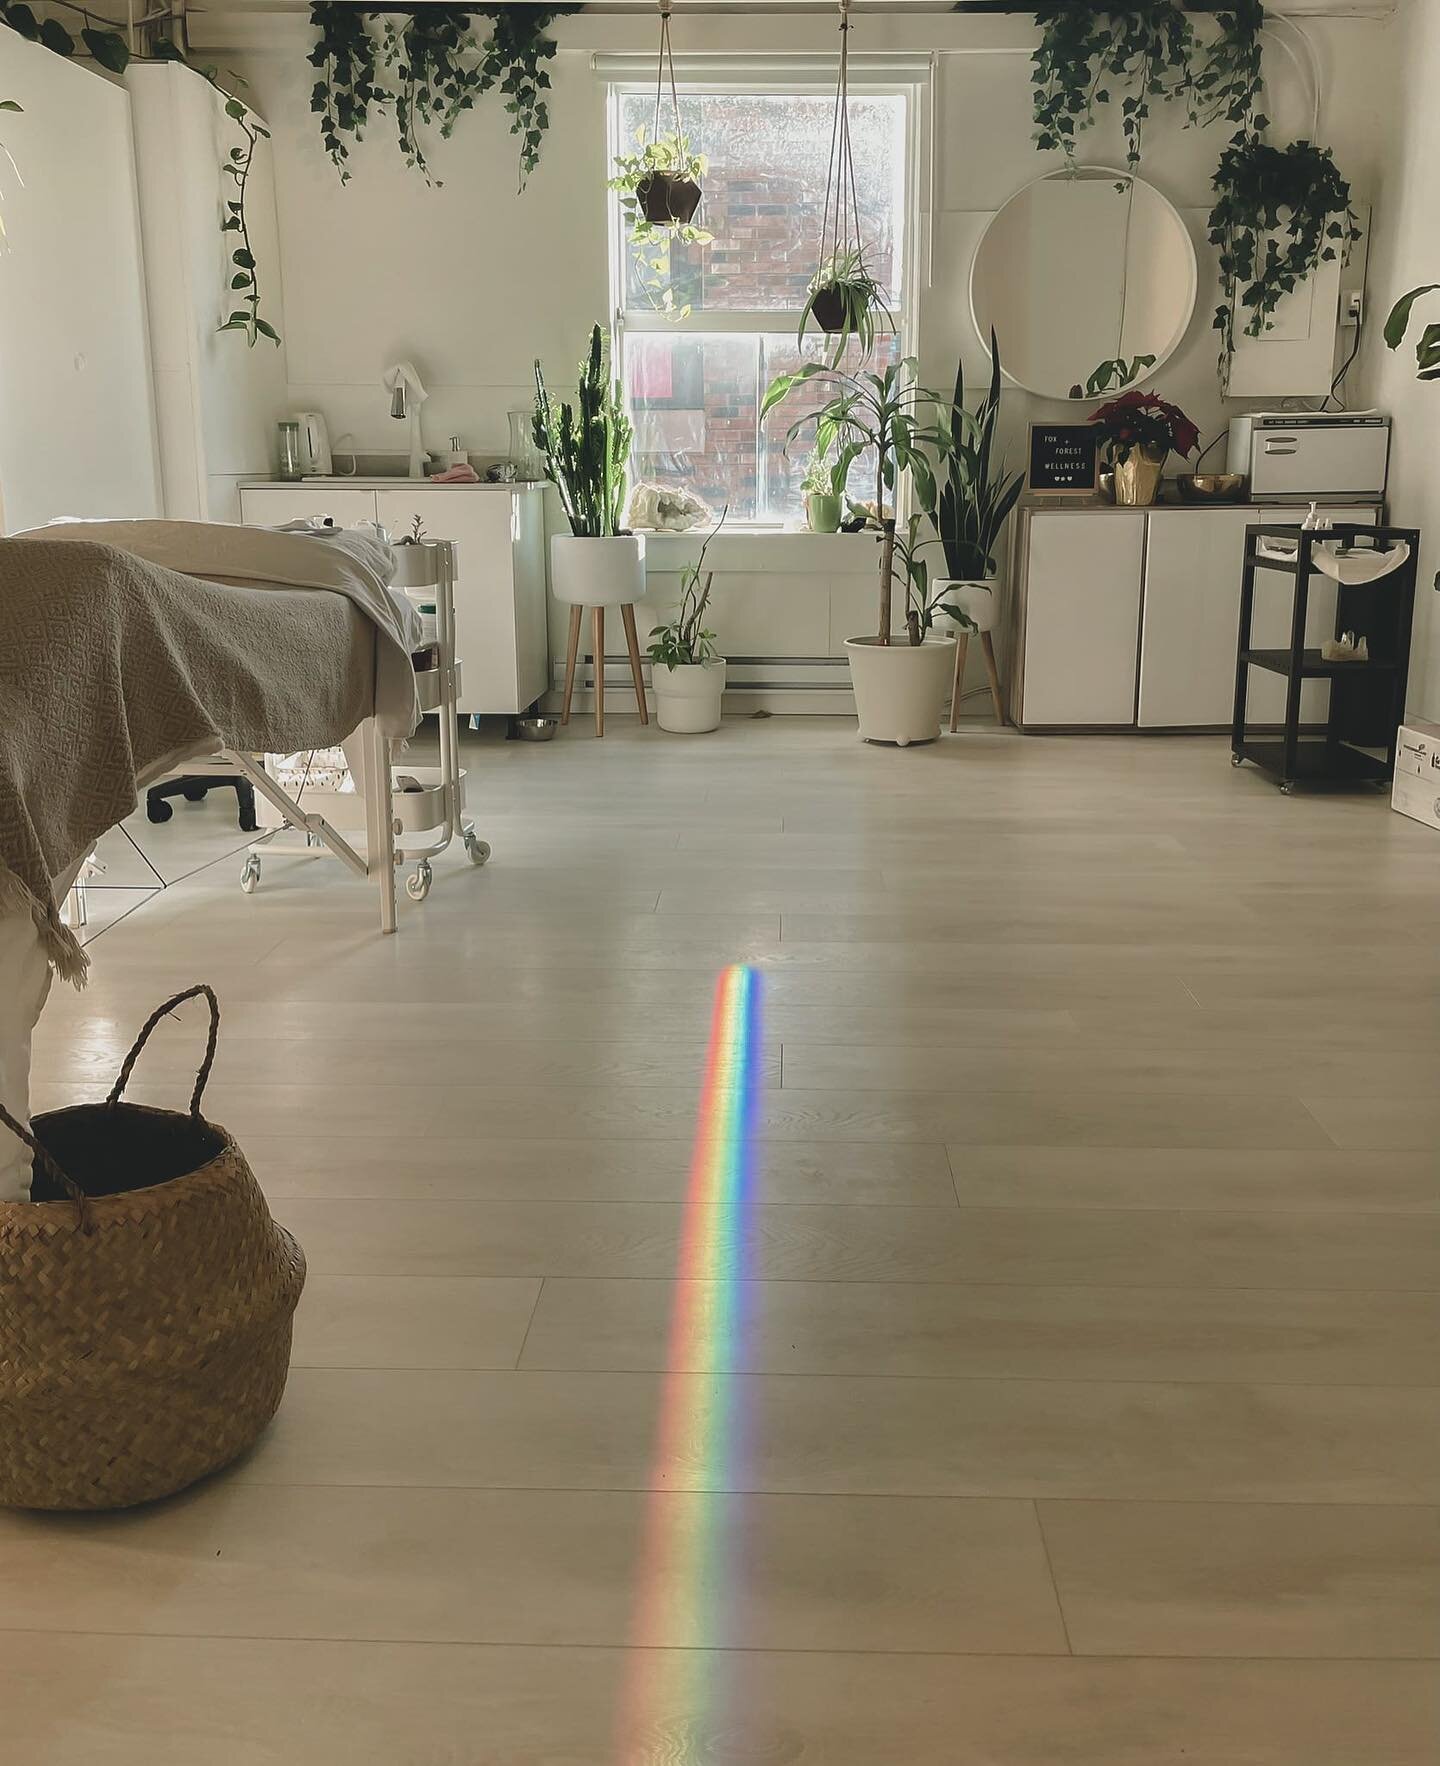 Love when our rainbow runway appears. 💃🏾
#rainbow #prism #acupuncture #northshore #northvancouver #lonsdale